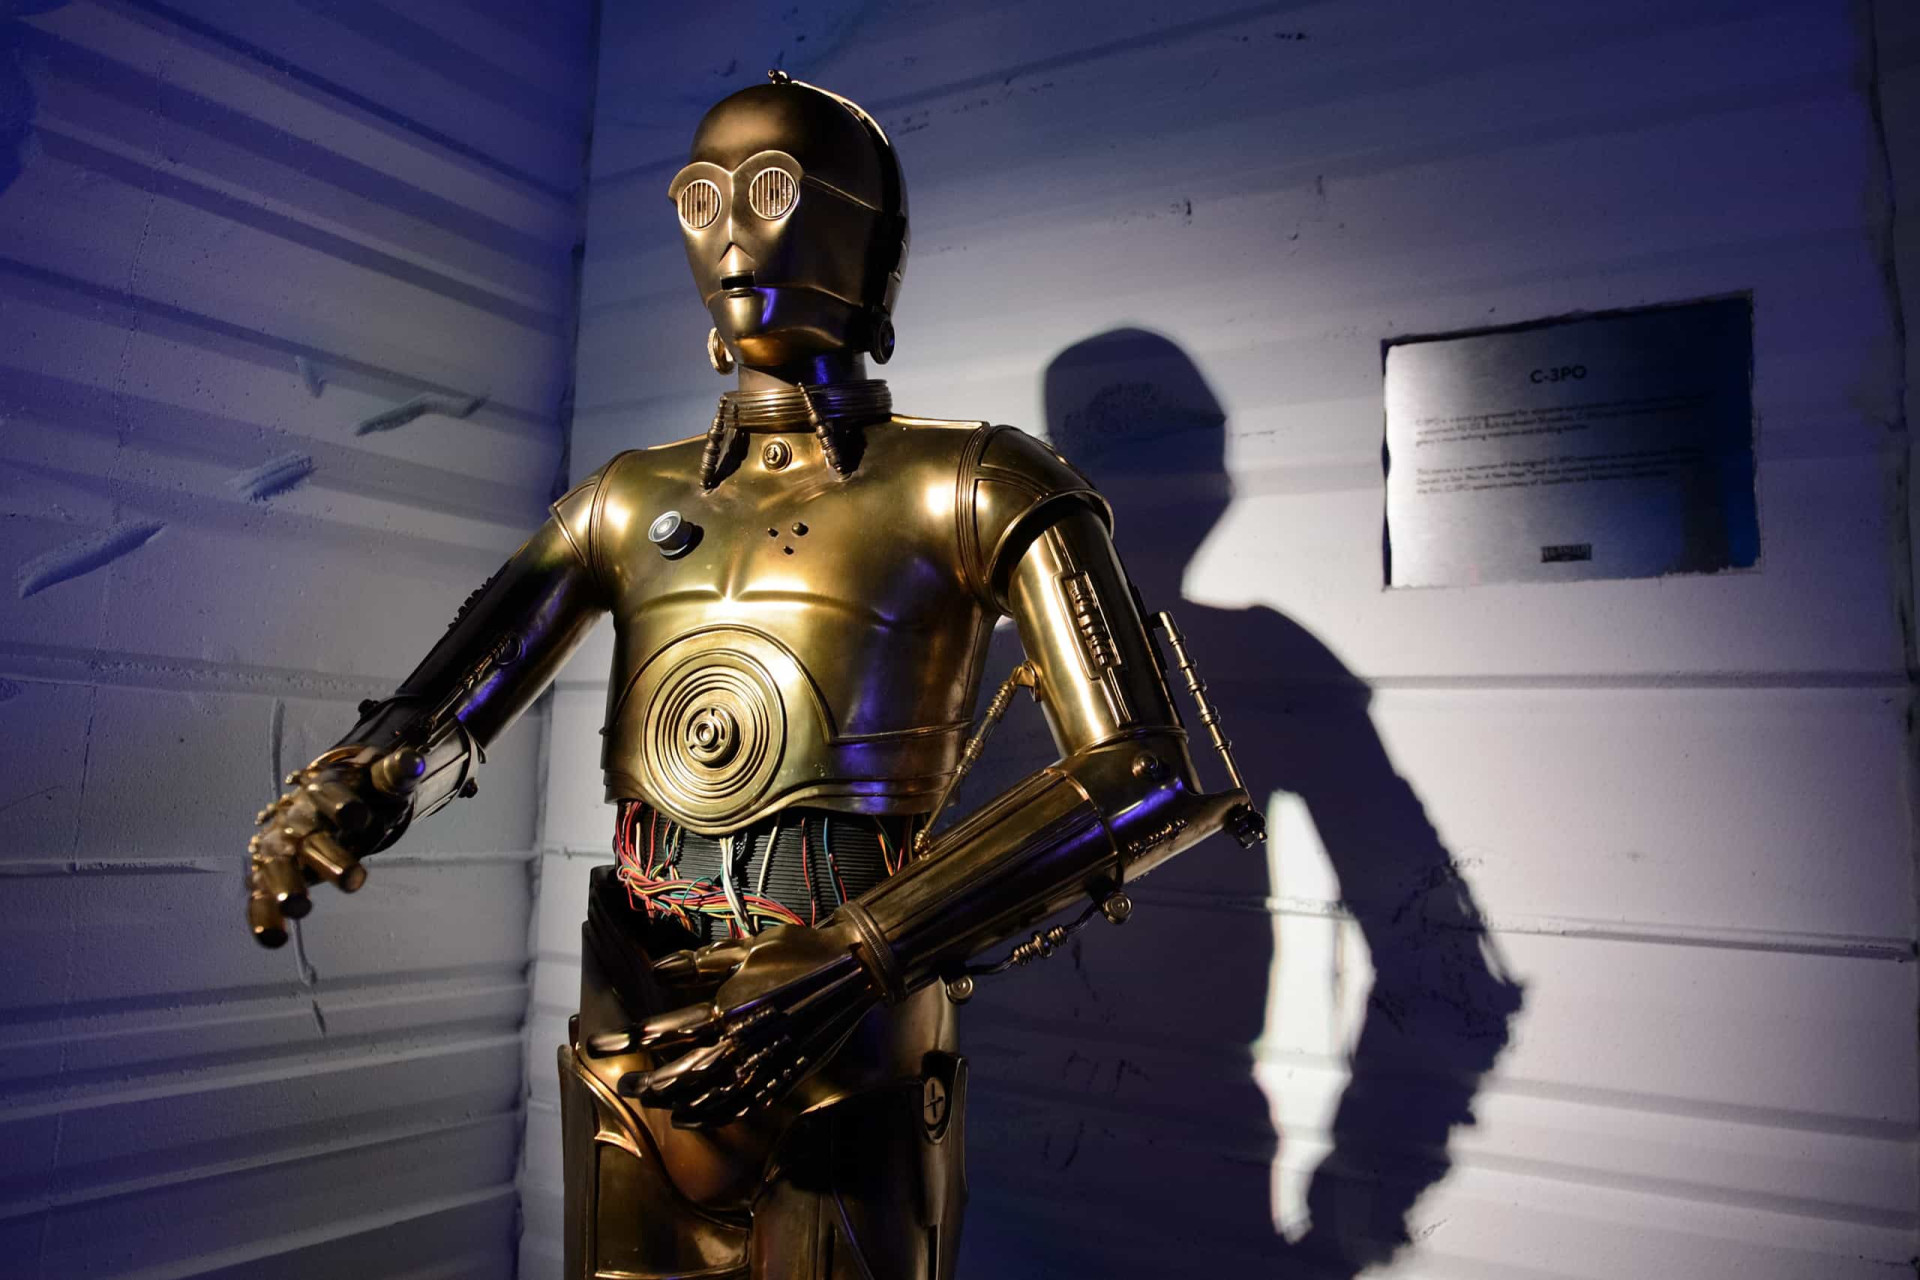 <p>Replicas of HAL 9000 from '2001: A Space Odyssey' (1968) and Star Wars' favorite C-3PO are among the automatons waiting to greet visitors at The Robot Hall of Fame, housed in the Carnegie Science Center.</p><p><a href="https://www.msn.com/en-us/community/channel/vid-7xx8mnucu55yw63we9va2gwr7uihbxwc68fxqp25x6tg4ftibpra?cvid=94631541bc0f4f89bfd59158d696ad7e">Follow us and access great exclusive content every day</a></p>